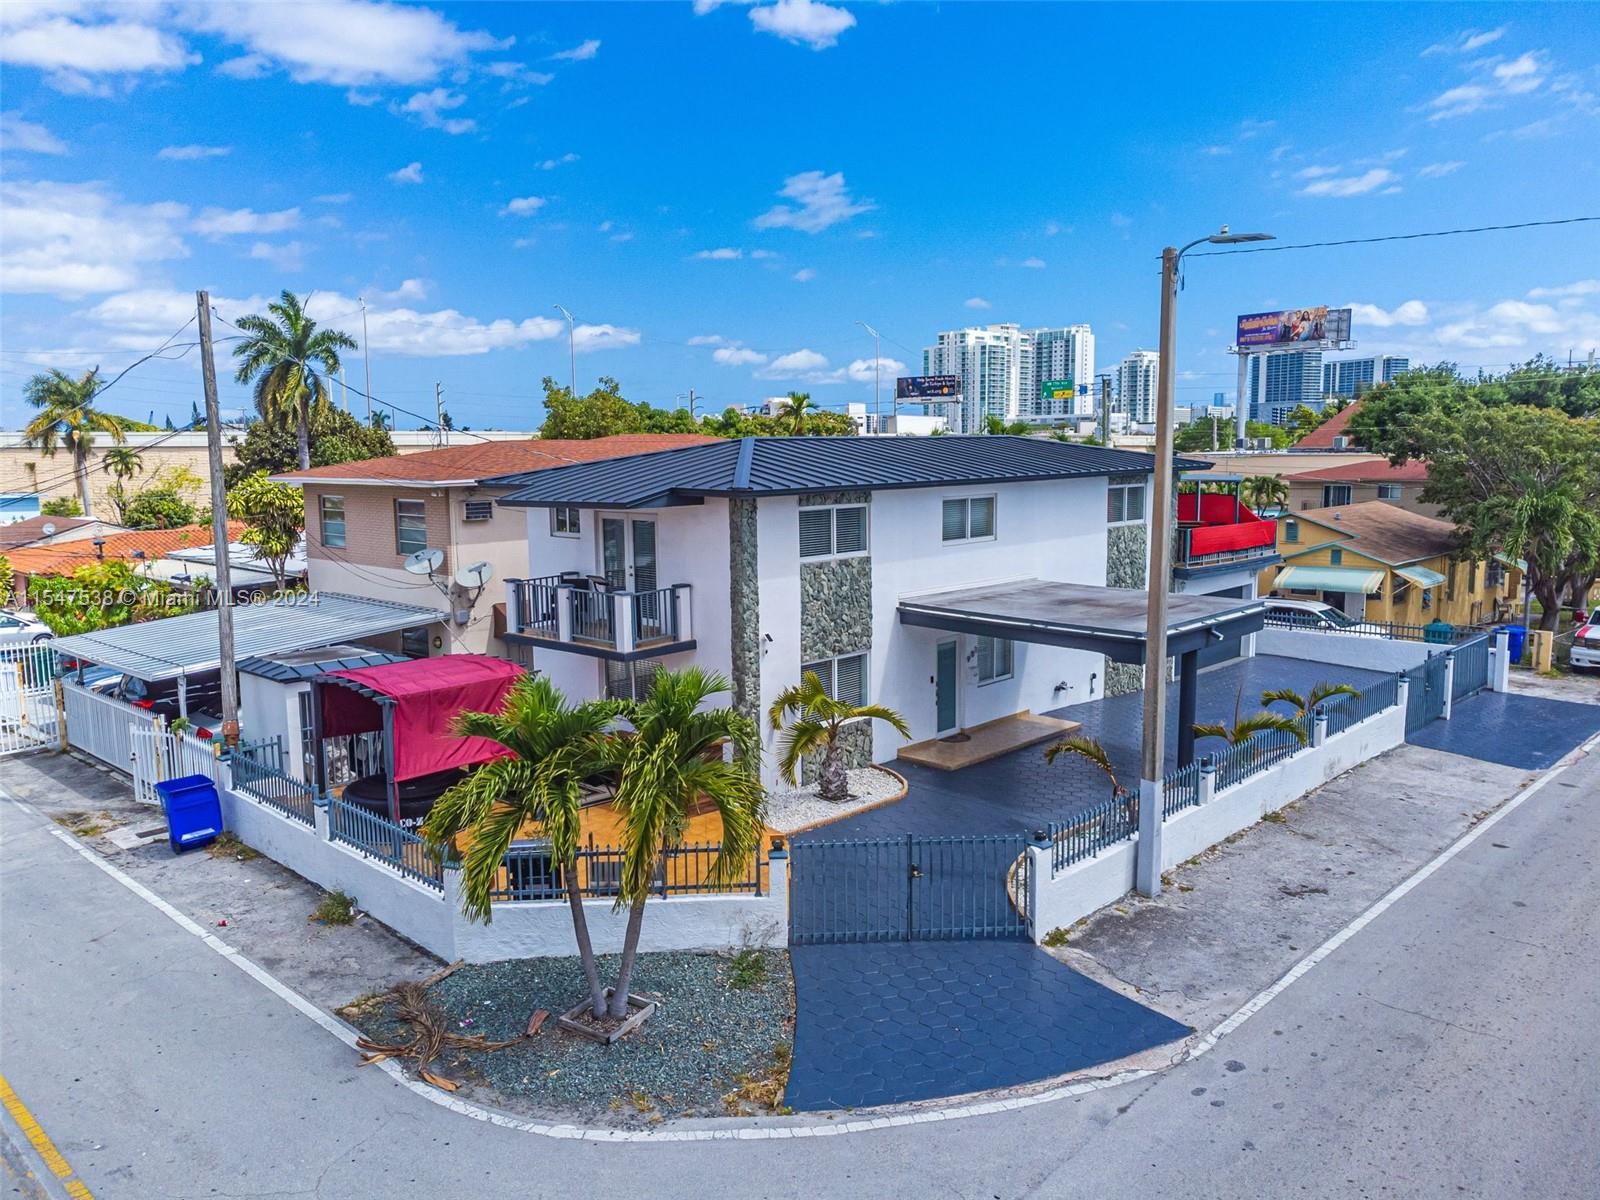 Photo of 901 NW 22nd Pl in Miami, FL